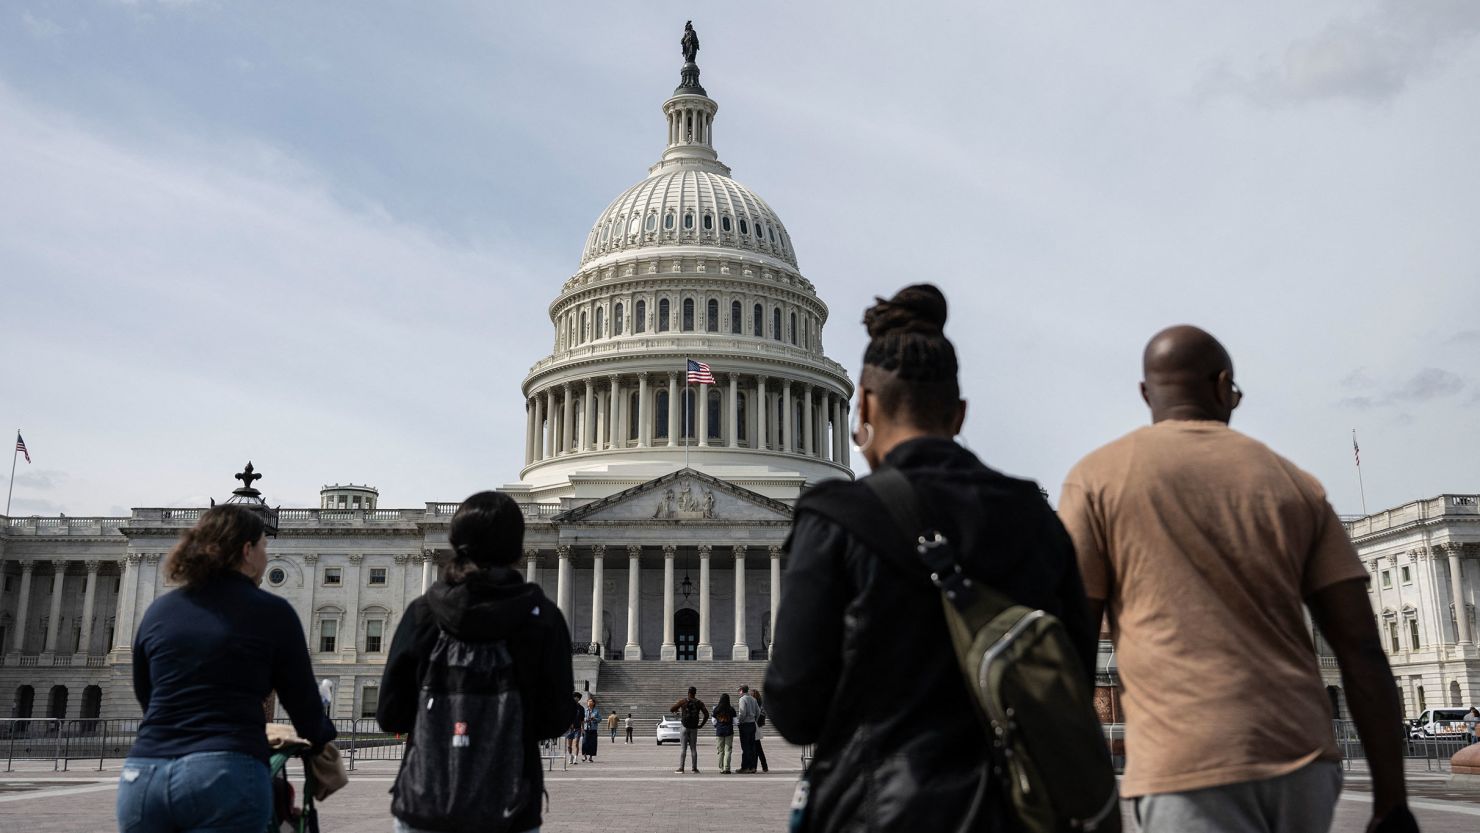 A group of people walk towards the US Capitol in Washington, DC, on March 8.